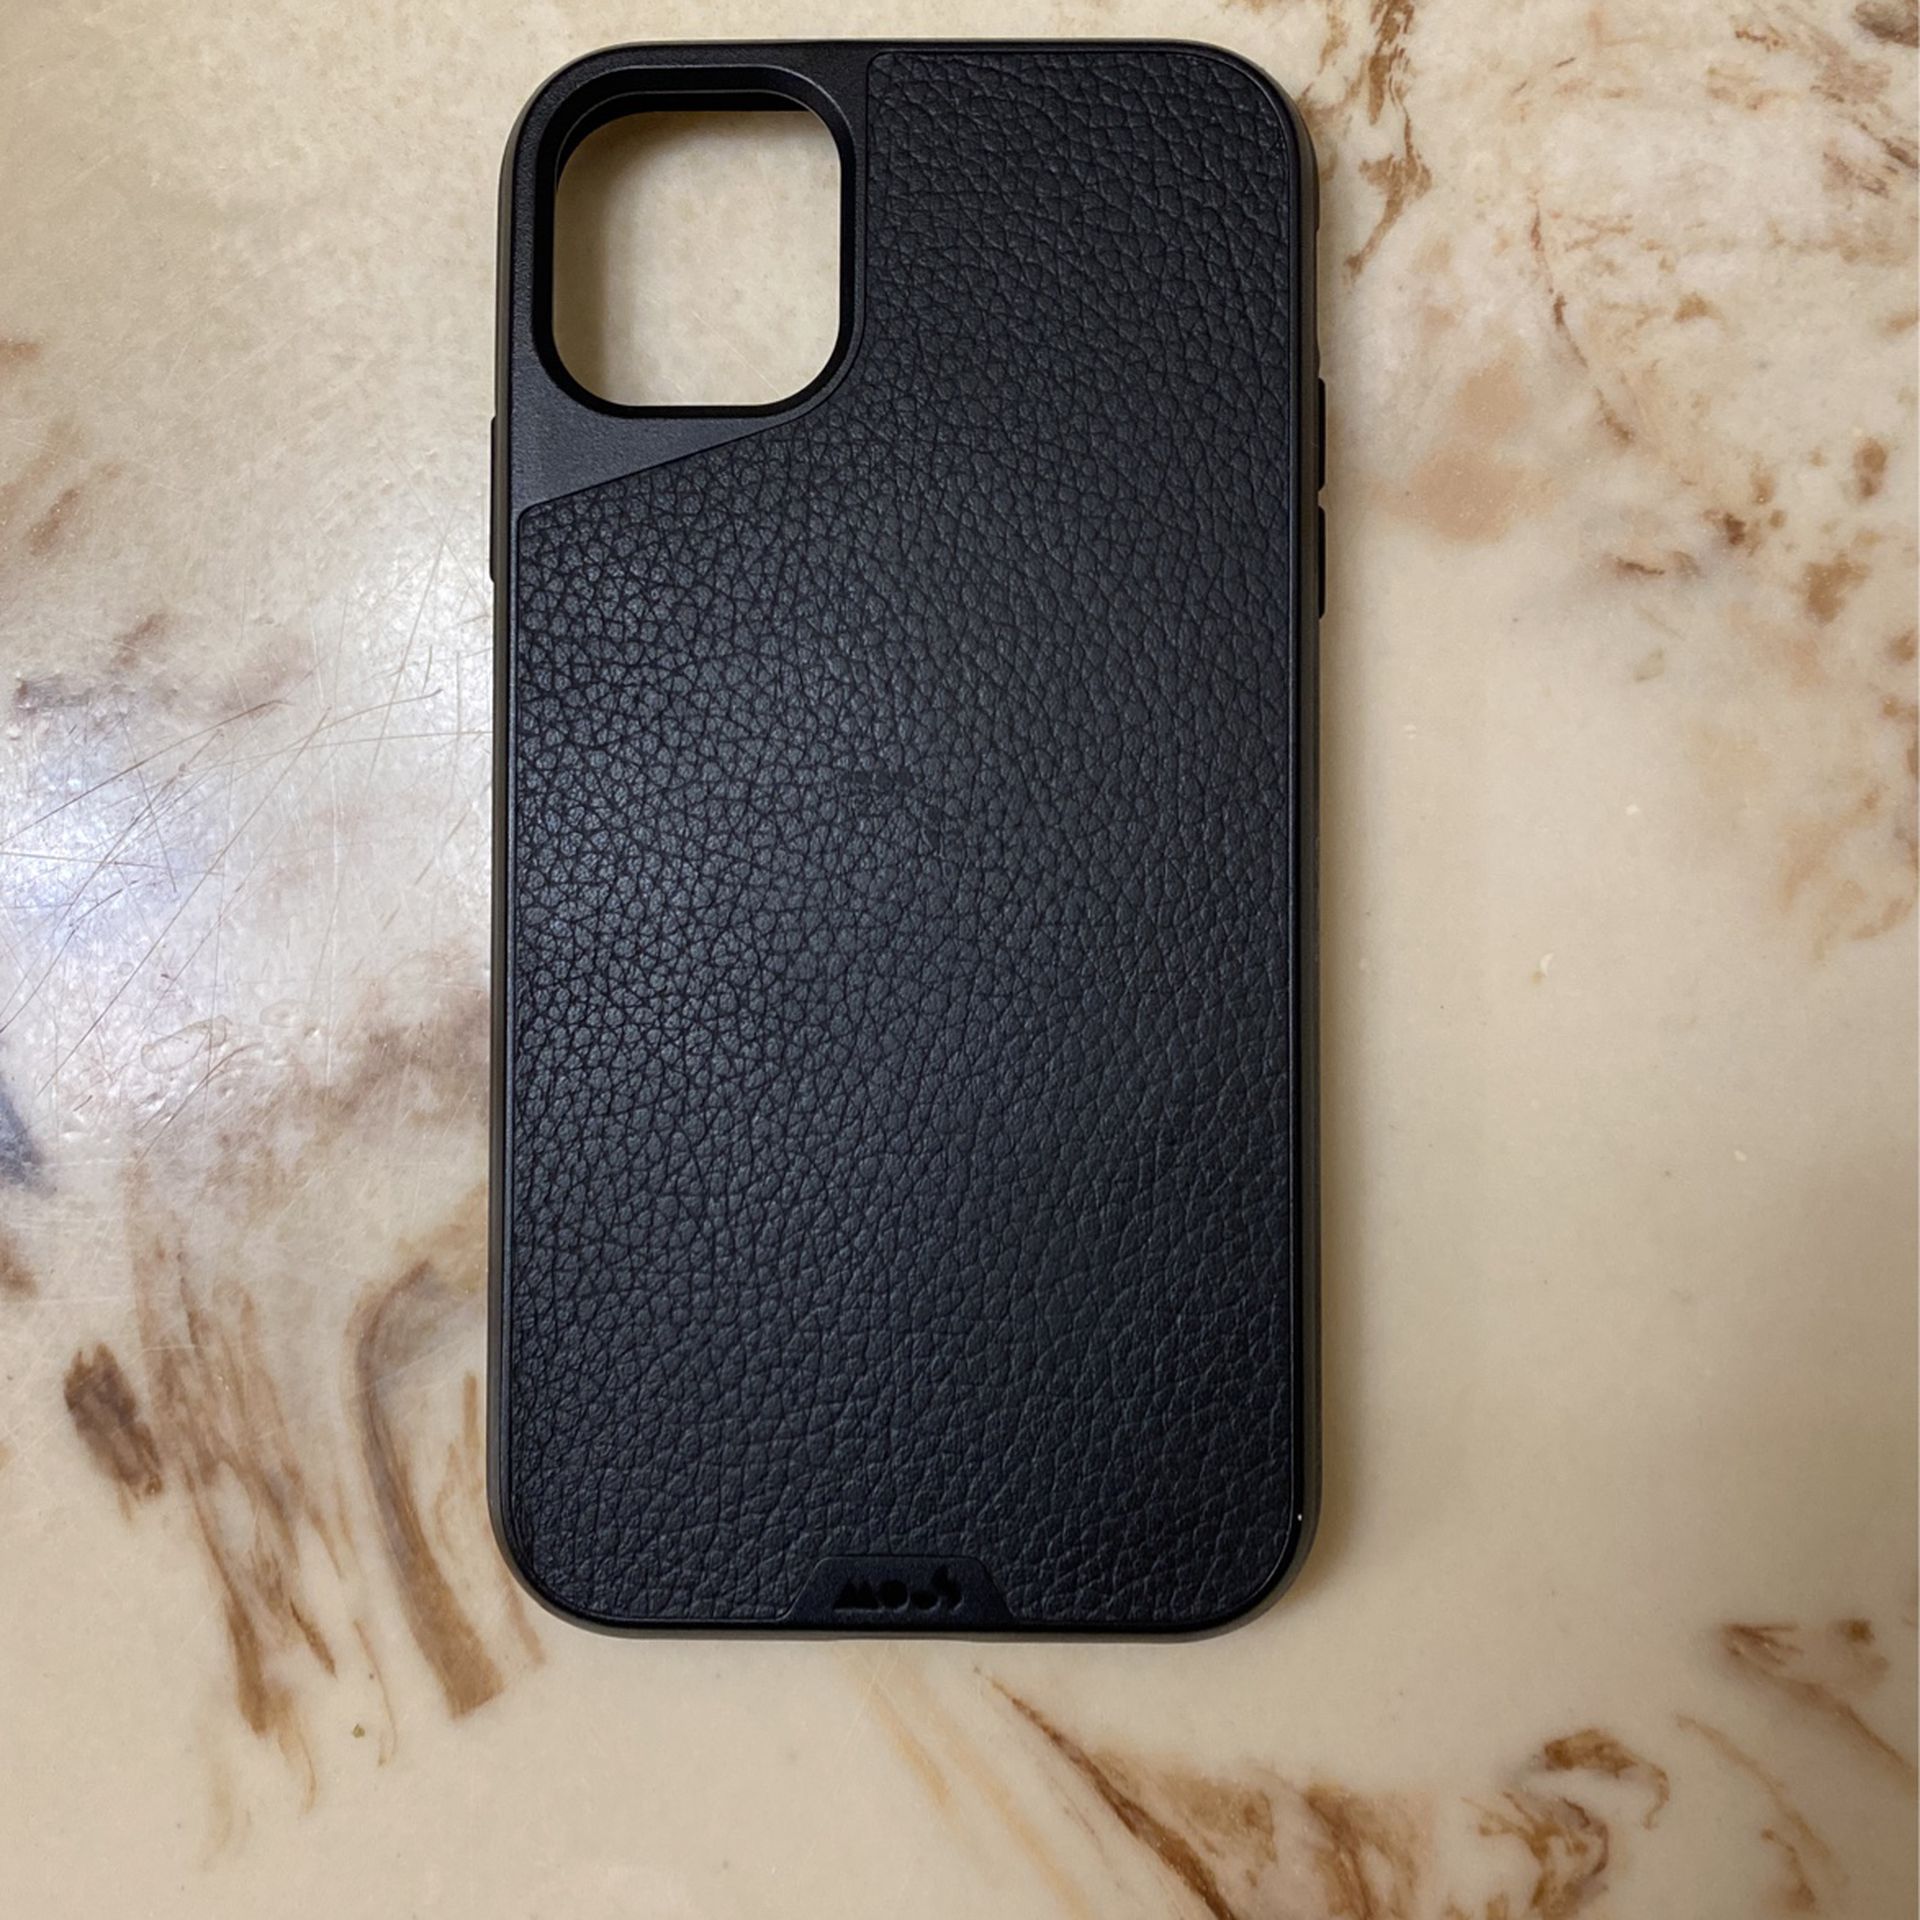 iPhone 11 Leather Case-Mous Limitless 3.0 